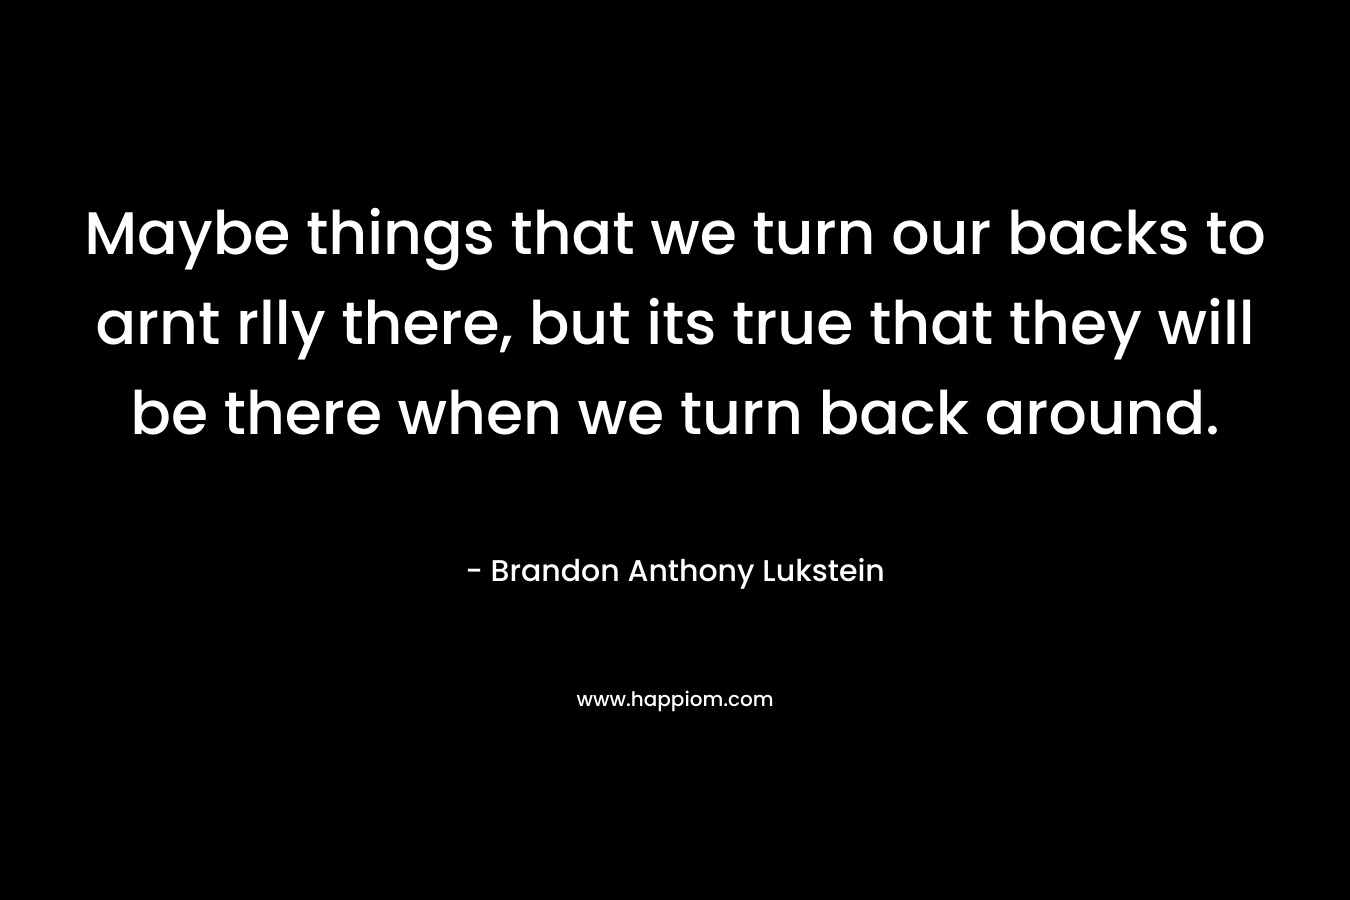 Maybe things that we turn our backs to arnt rlly there, but its true that they will be there when we turn back around.